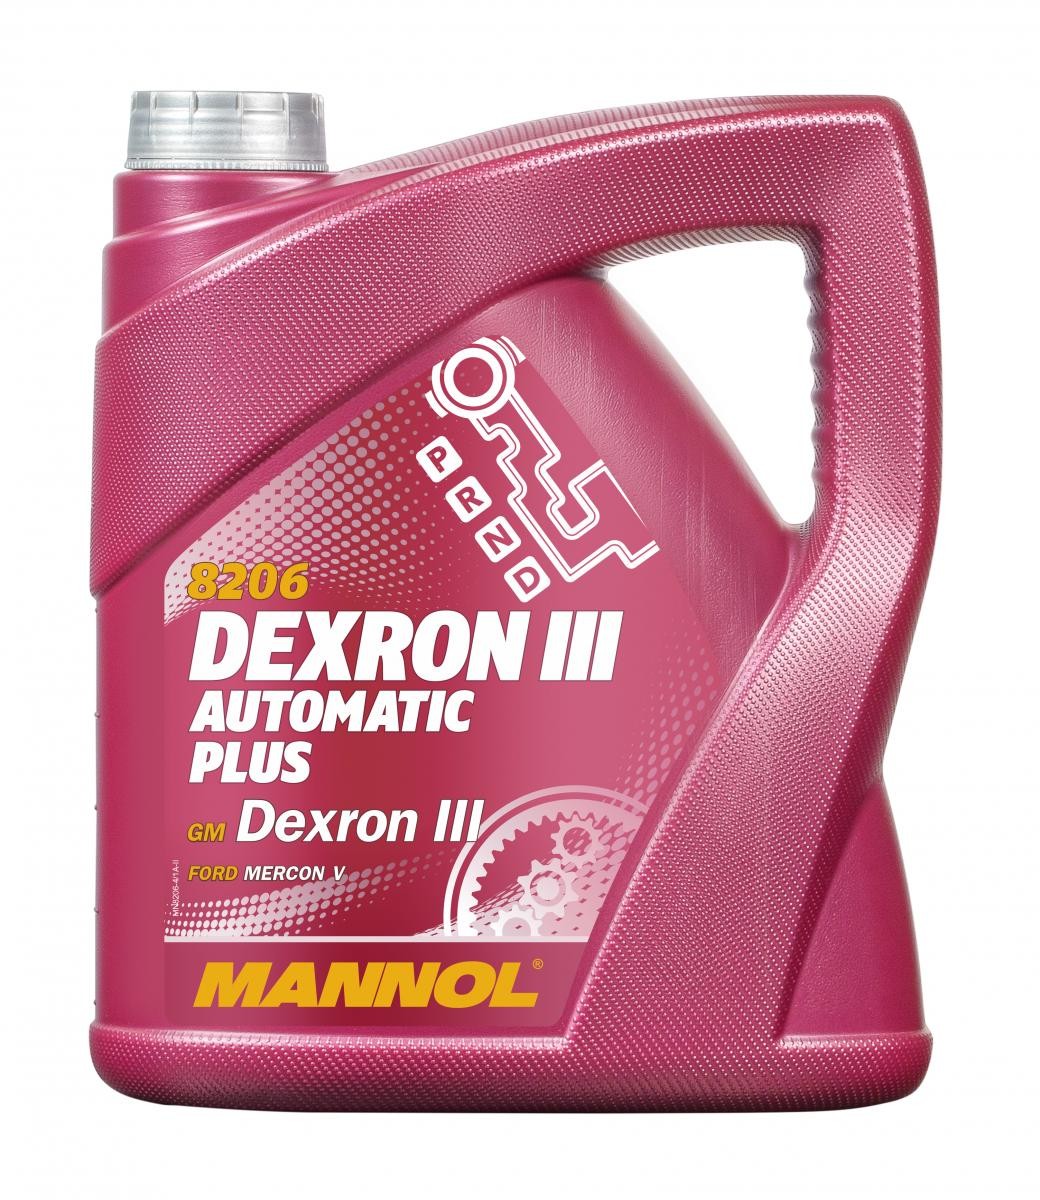 MANNOL MN8206-4 Automatic transmission fluid cheap in online store